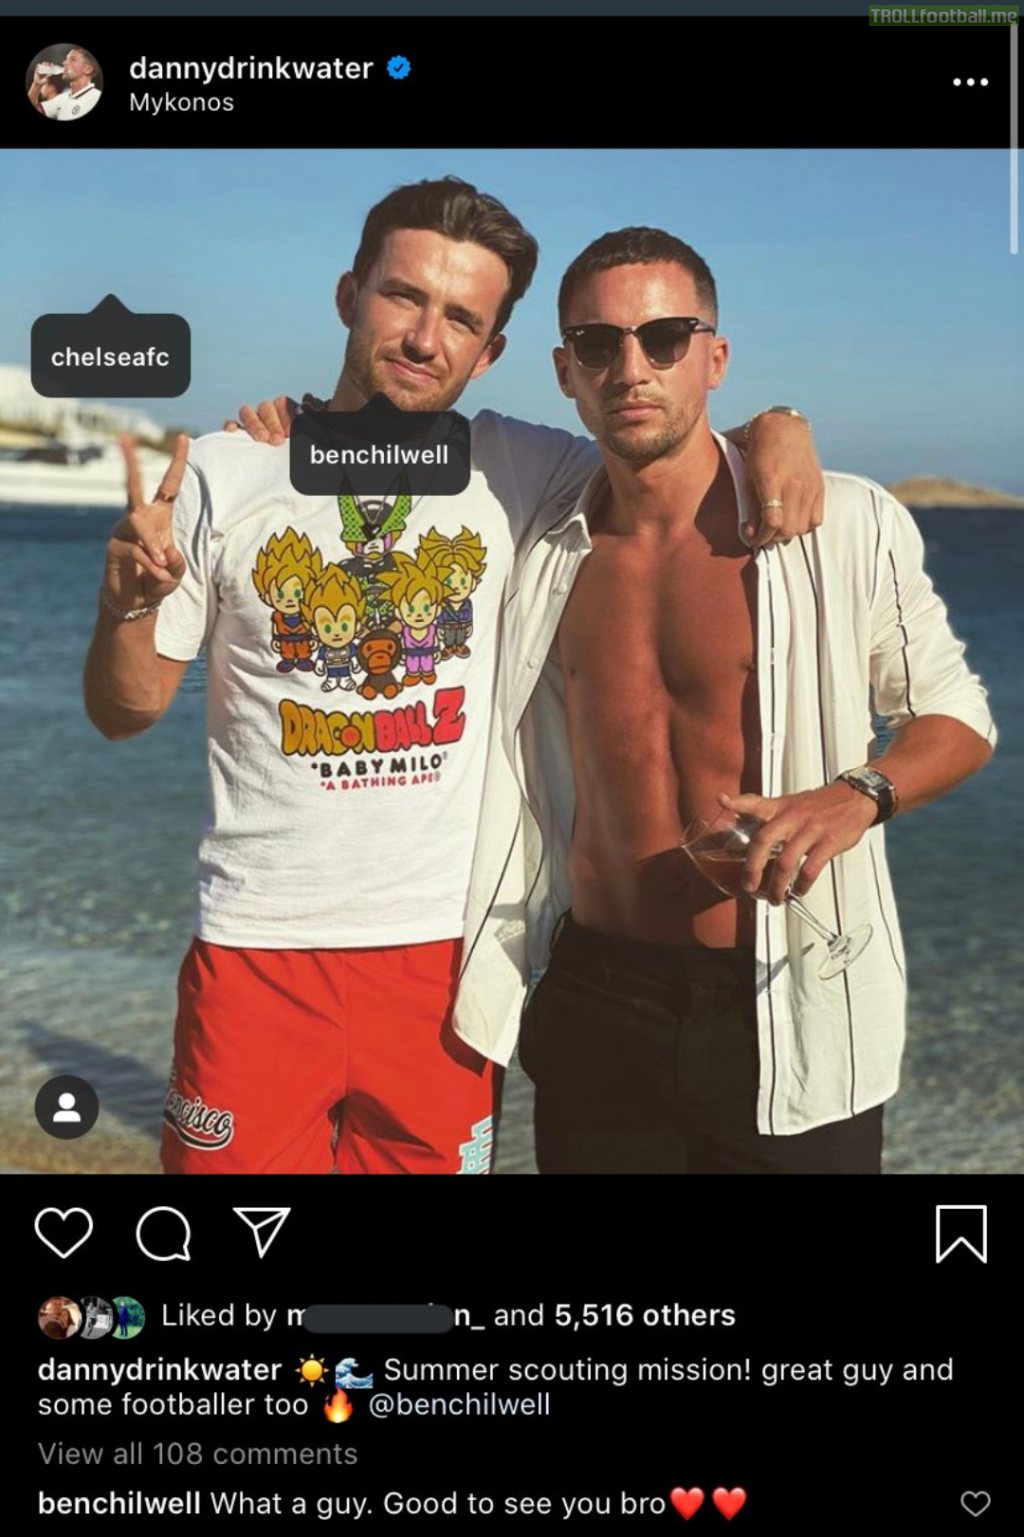 Danny Drinkwater tags Ben Chilwell and Chelsea on Instagram, mentions a scouting mission.